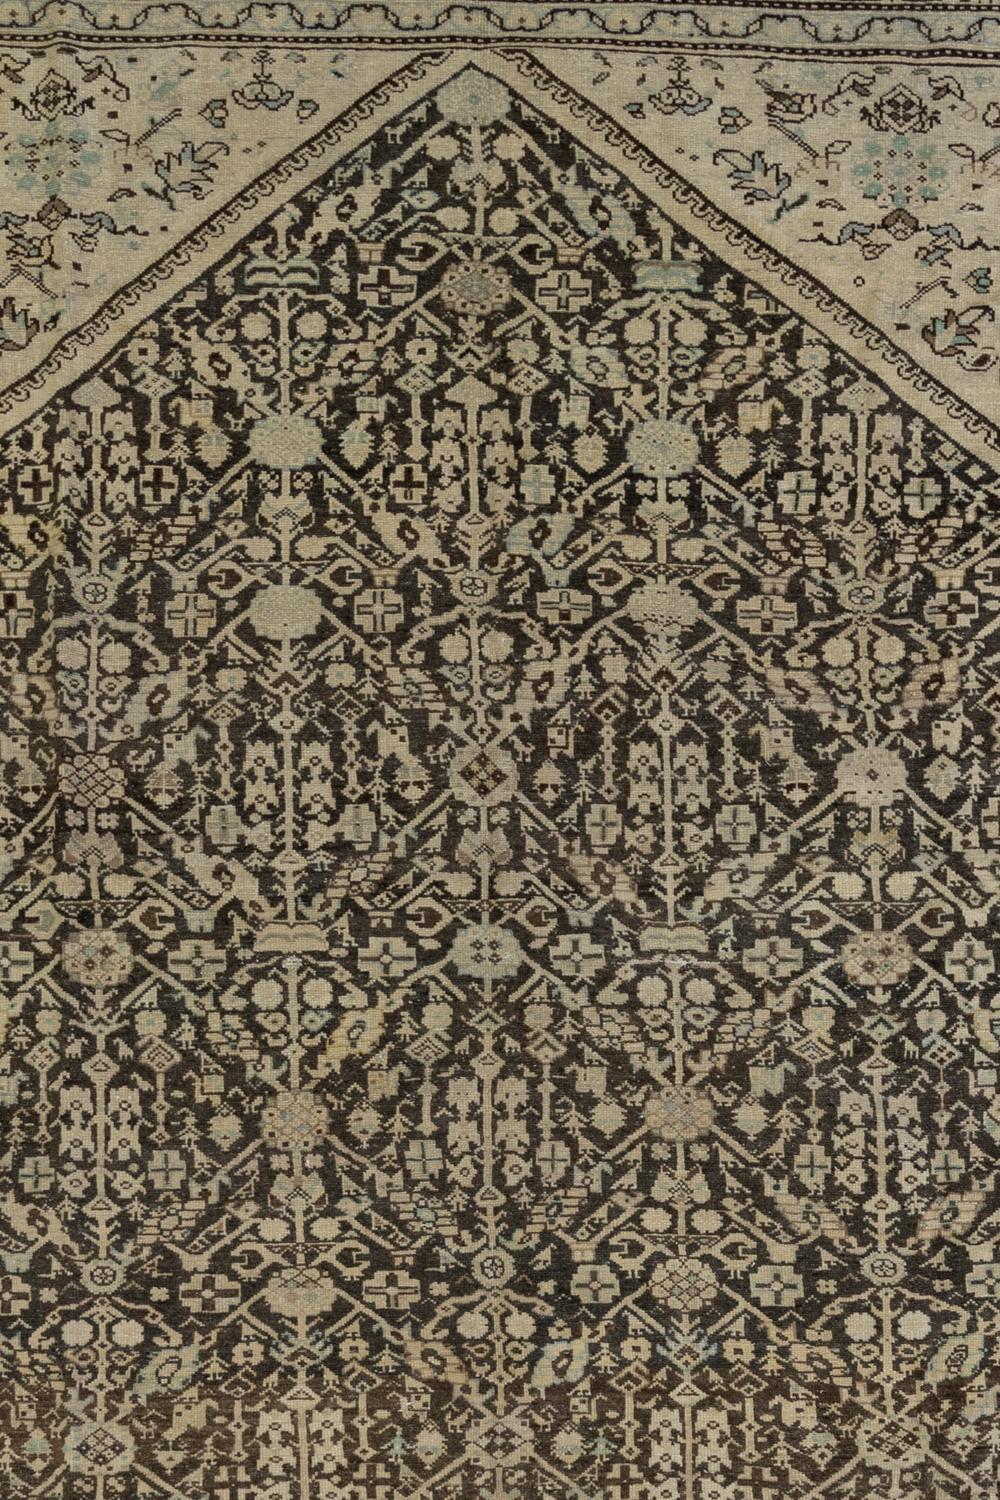 Antique Persian Mahal

Circa: 1920. Low pile

Wear notes: none

Good condition. Deep blackened brown field with warm tan and blue accents. Suitable for high traffic areas and dining rooms. 

Wear Guide:
Vintage and antique rugs are by